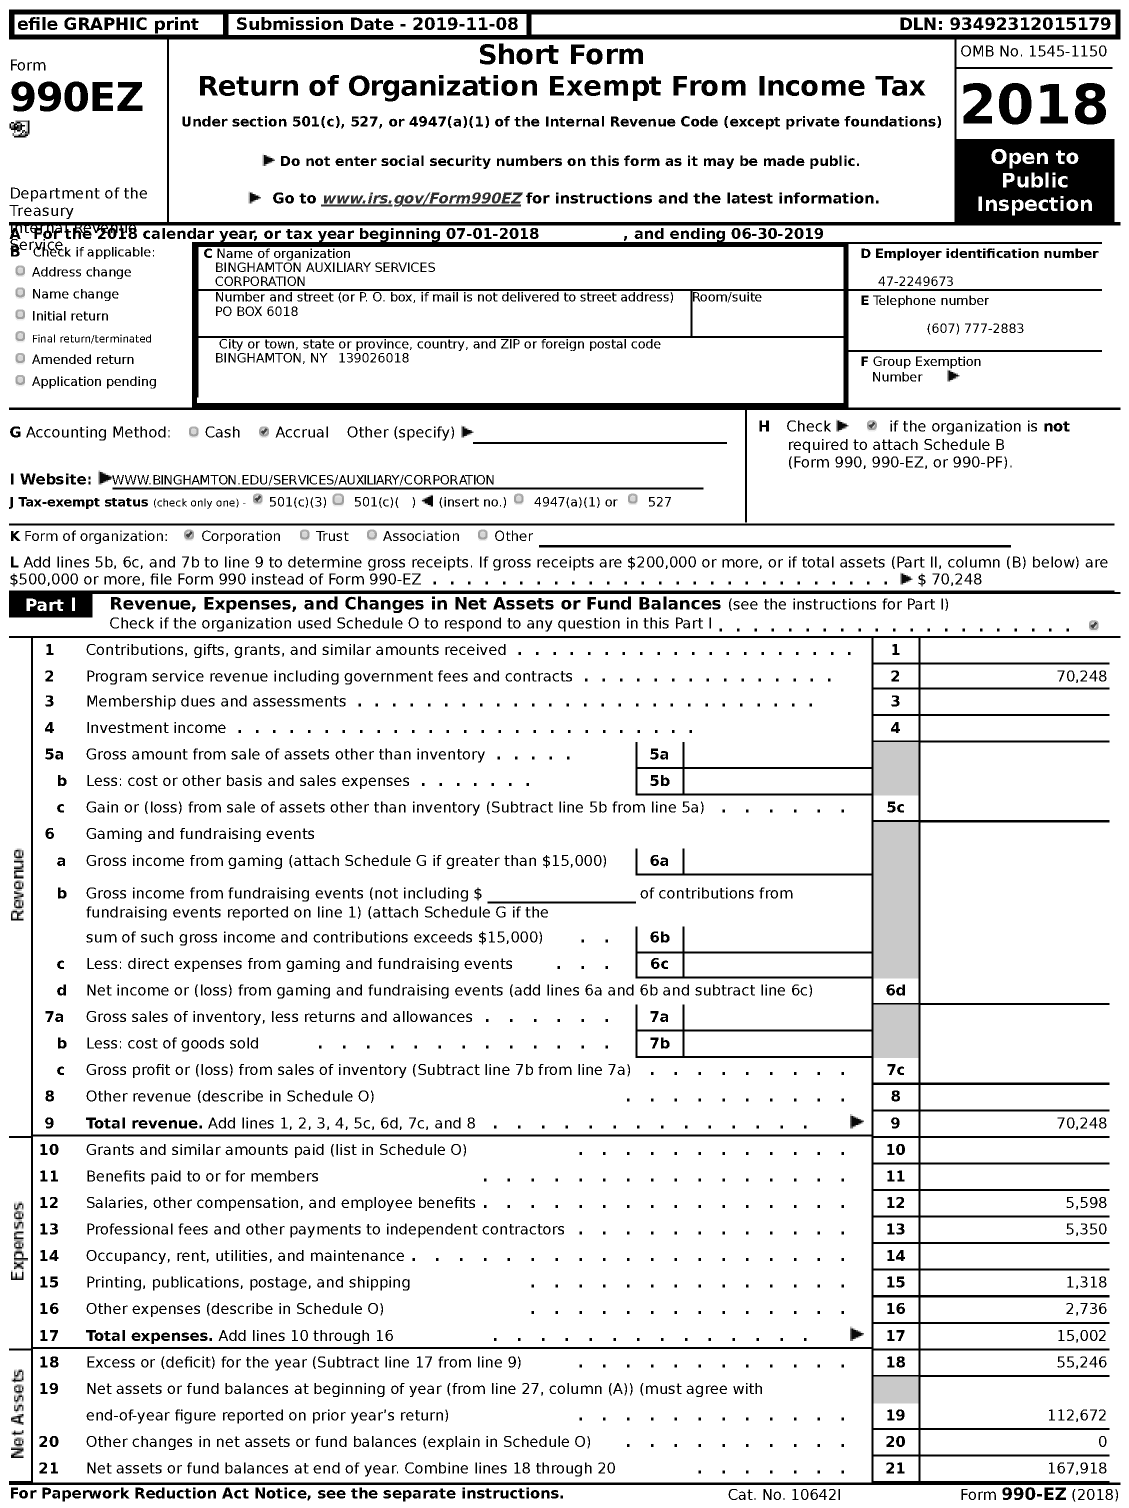 Image of first page of 2018 Form 990EZ for Binghamton Auxiliary Services Corporation